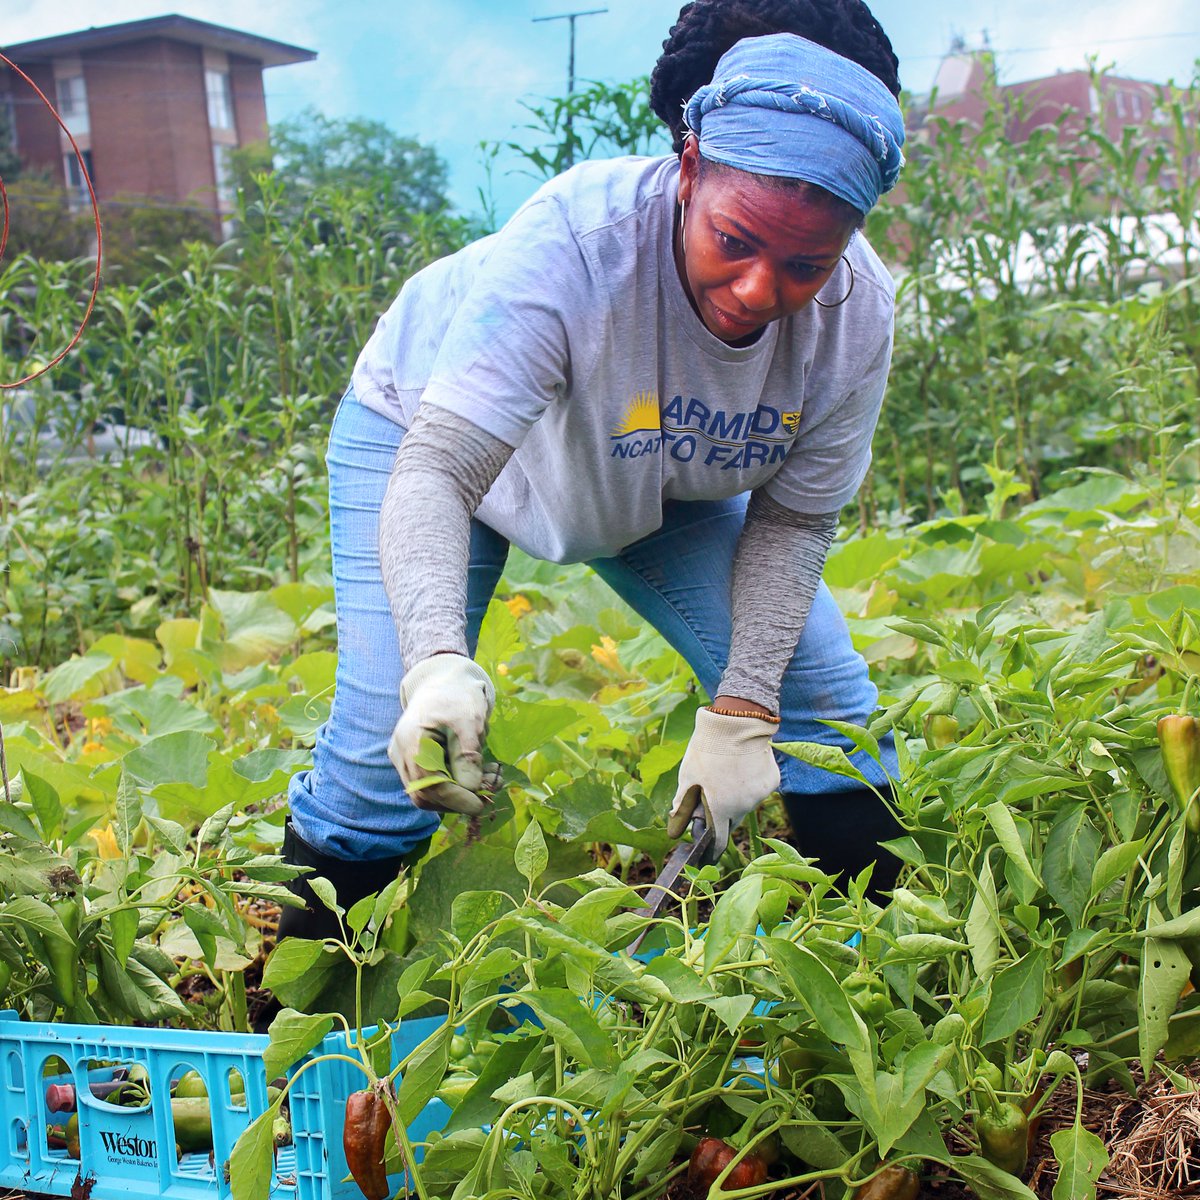 Military Veterans: Apply by Aug. 13 for Urban Farm Training in Baltimore Sept/Oct 2021 from @NCAT_ORG and USBG. Get an in-depth look at sustainable, profitable, small-scale urban farming enterprises and learn about urban farming as a career. bit.ly/2UC8CmR